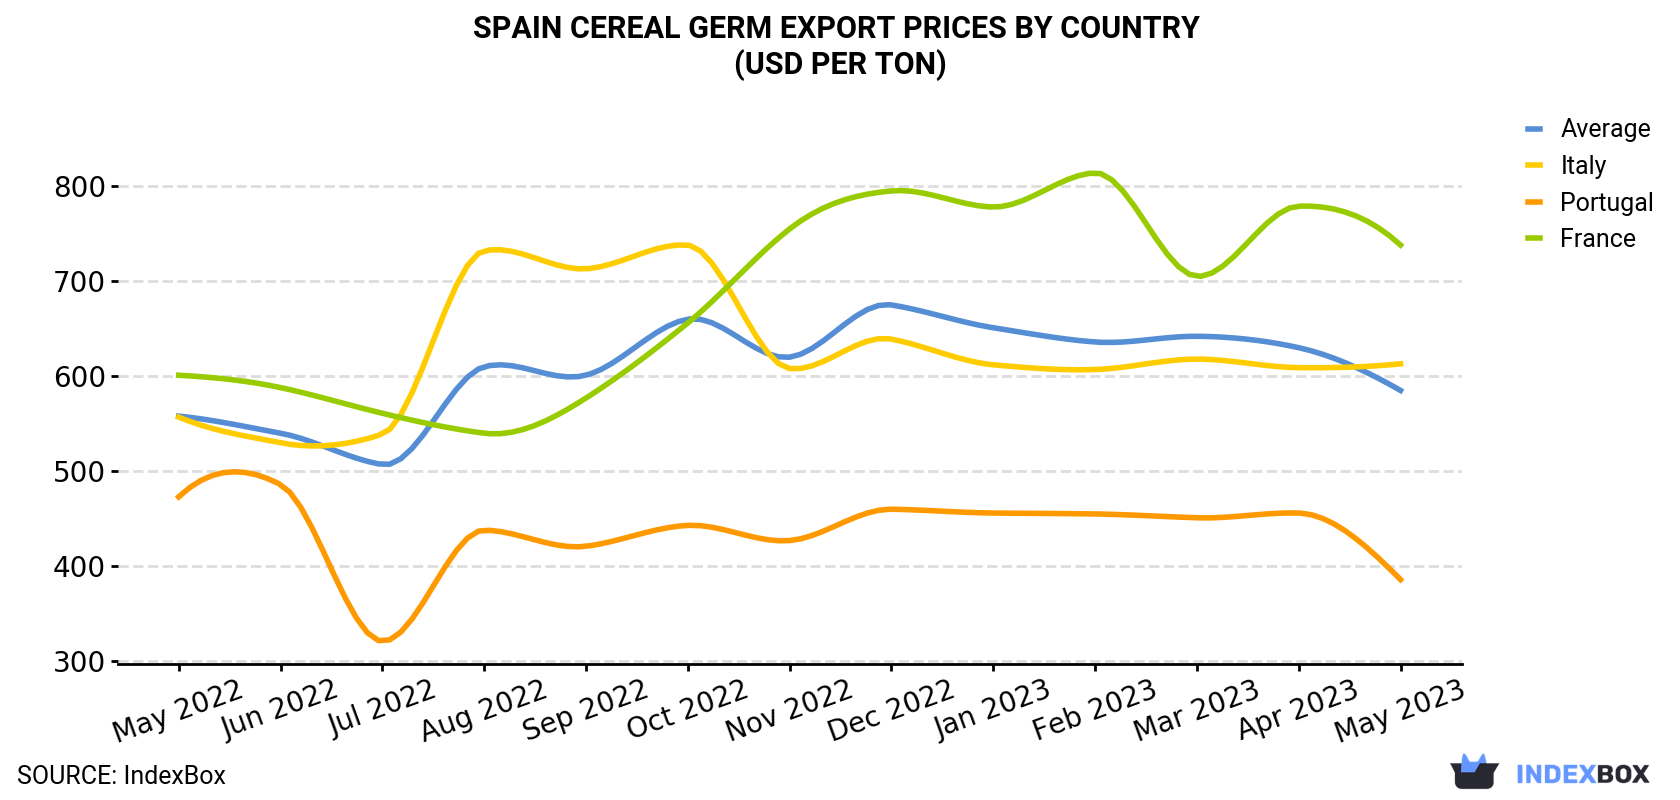 Spain Cereal Germ Export Prices By Country (USD Per Ton)